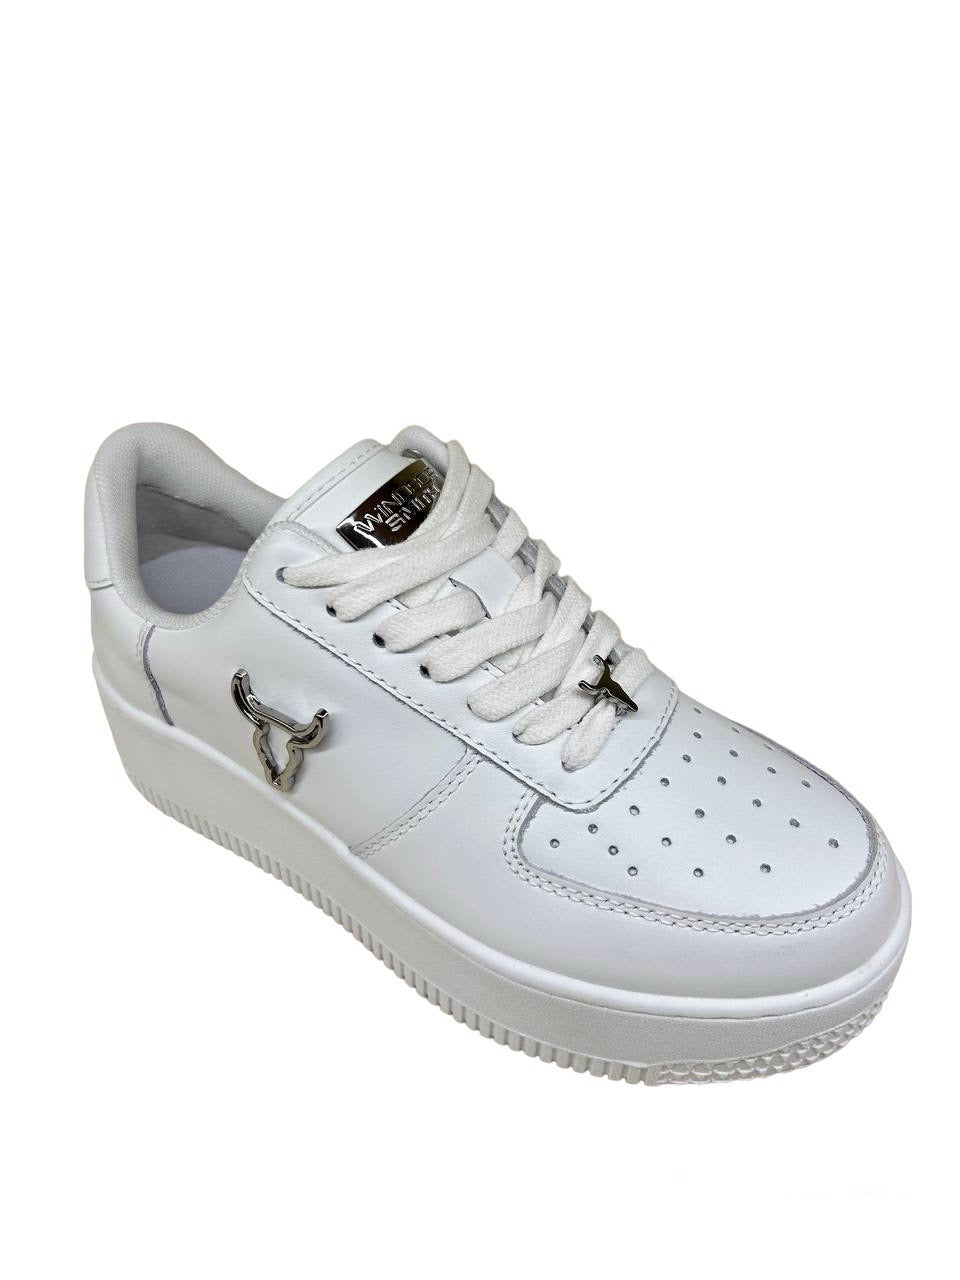 Windsor Smith RISE sneakers silver